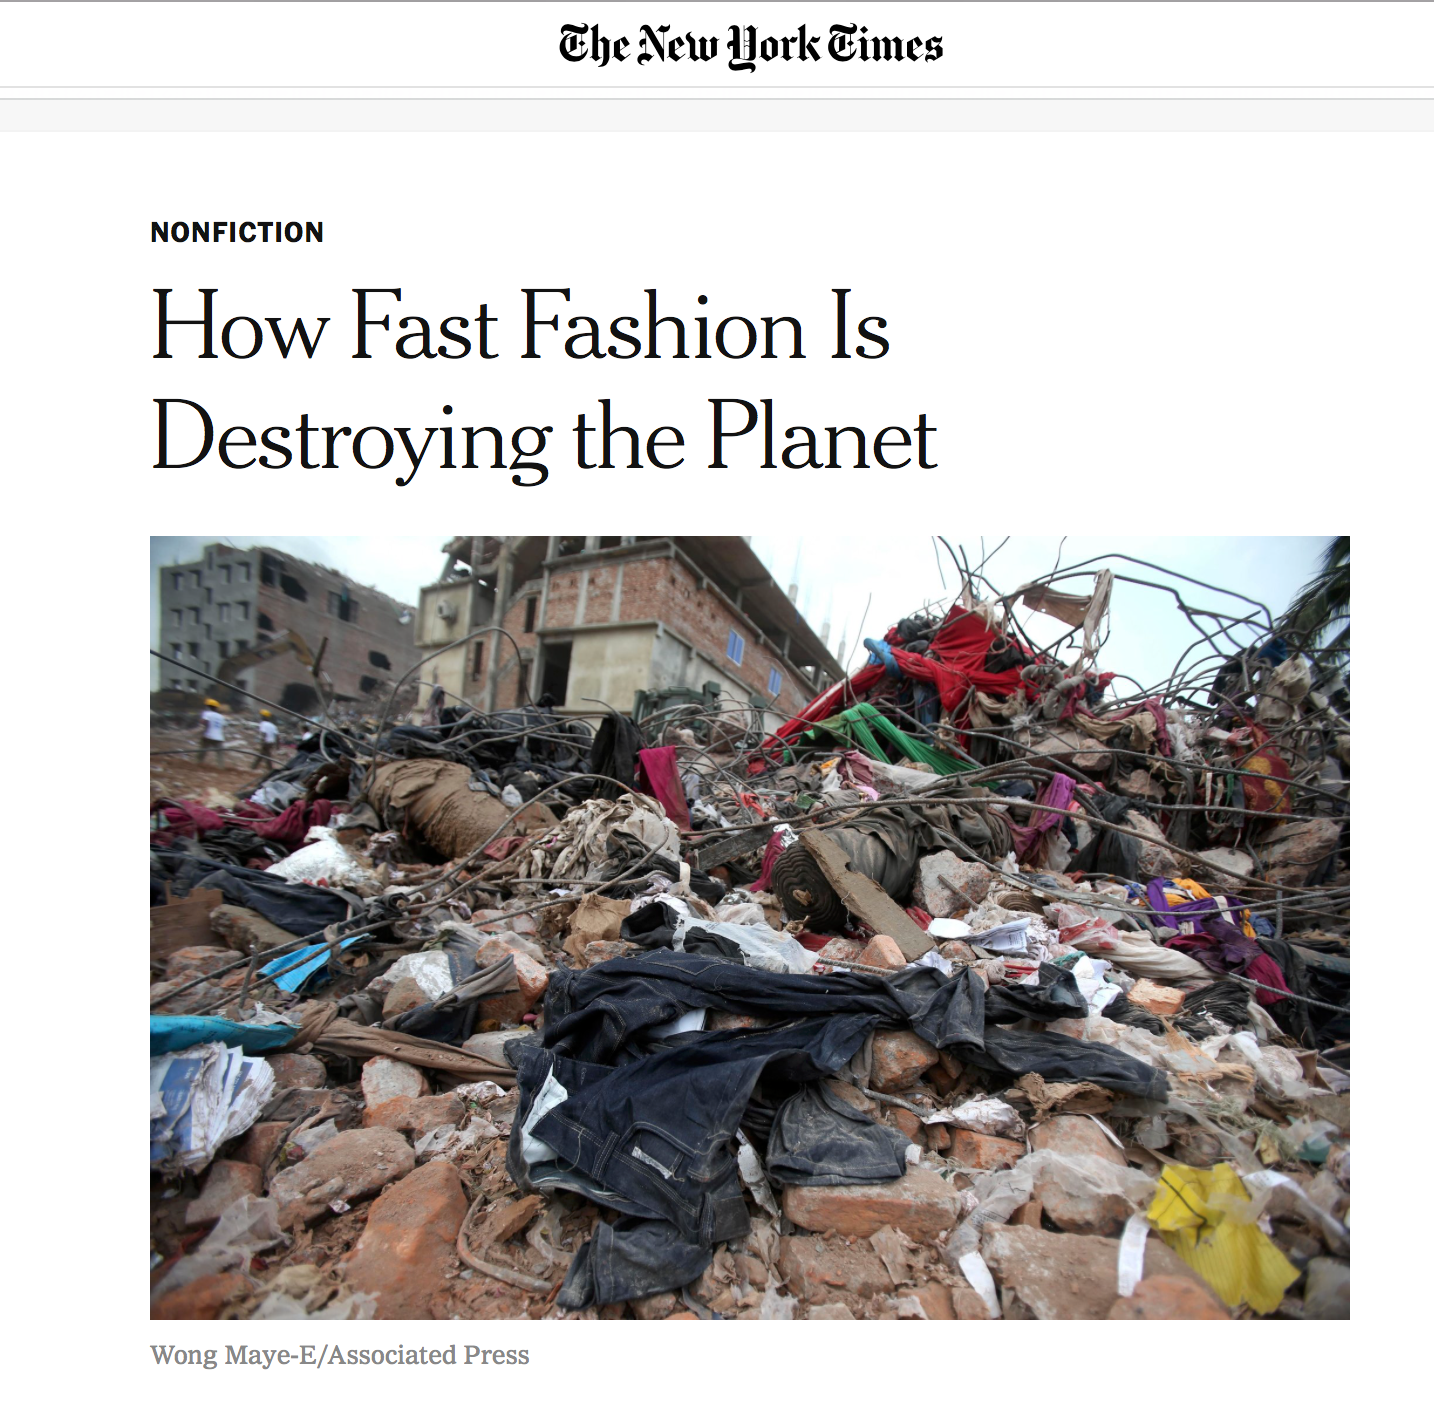 https://www.nytimes.com/2019/09/03/books/review/how-fast-fashion-is-destroying-the-planet.html